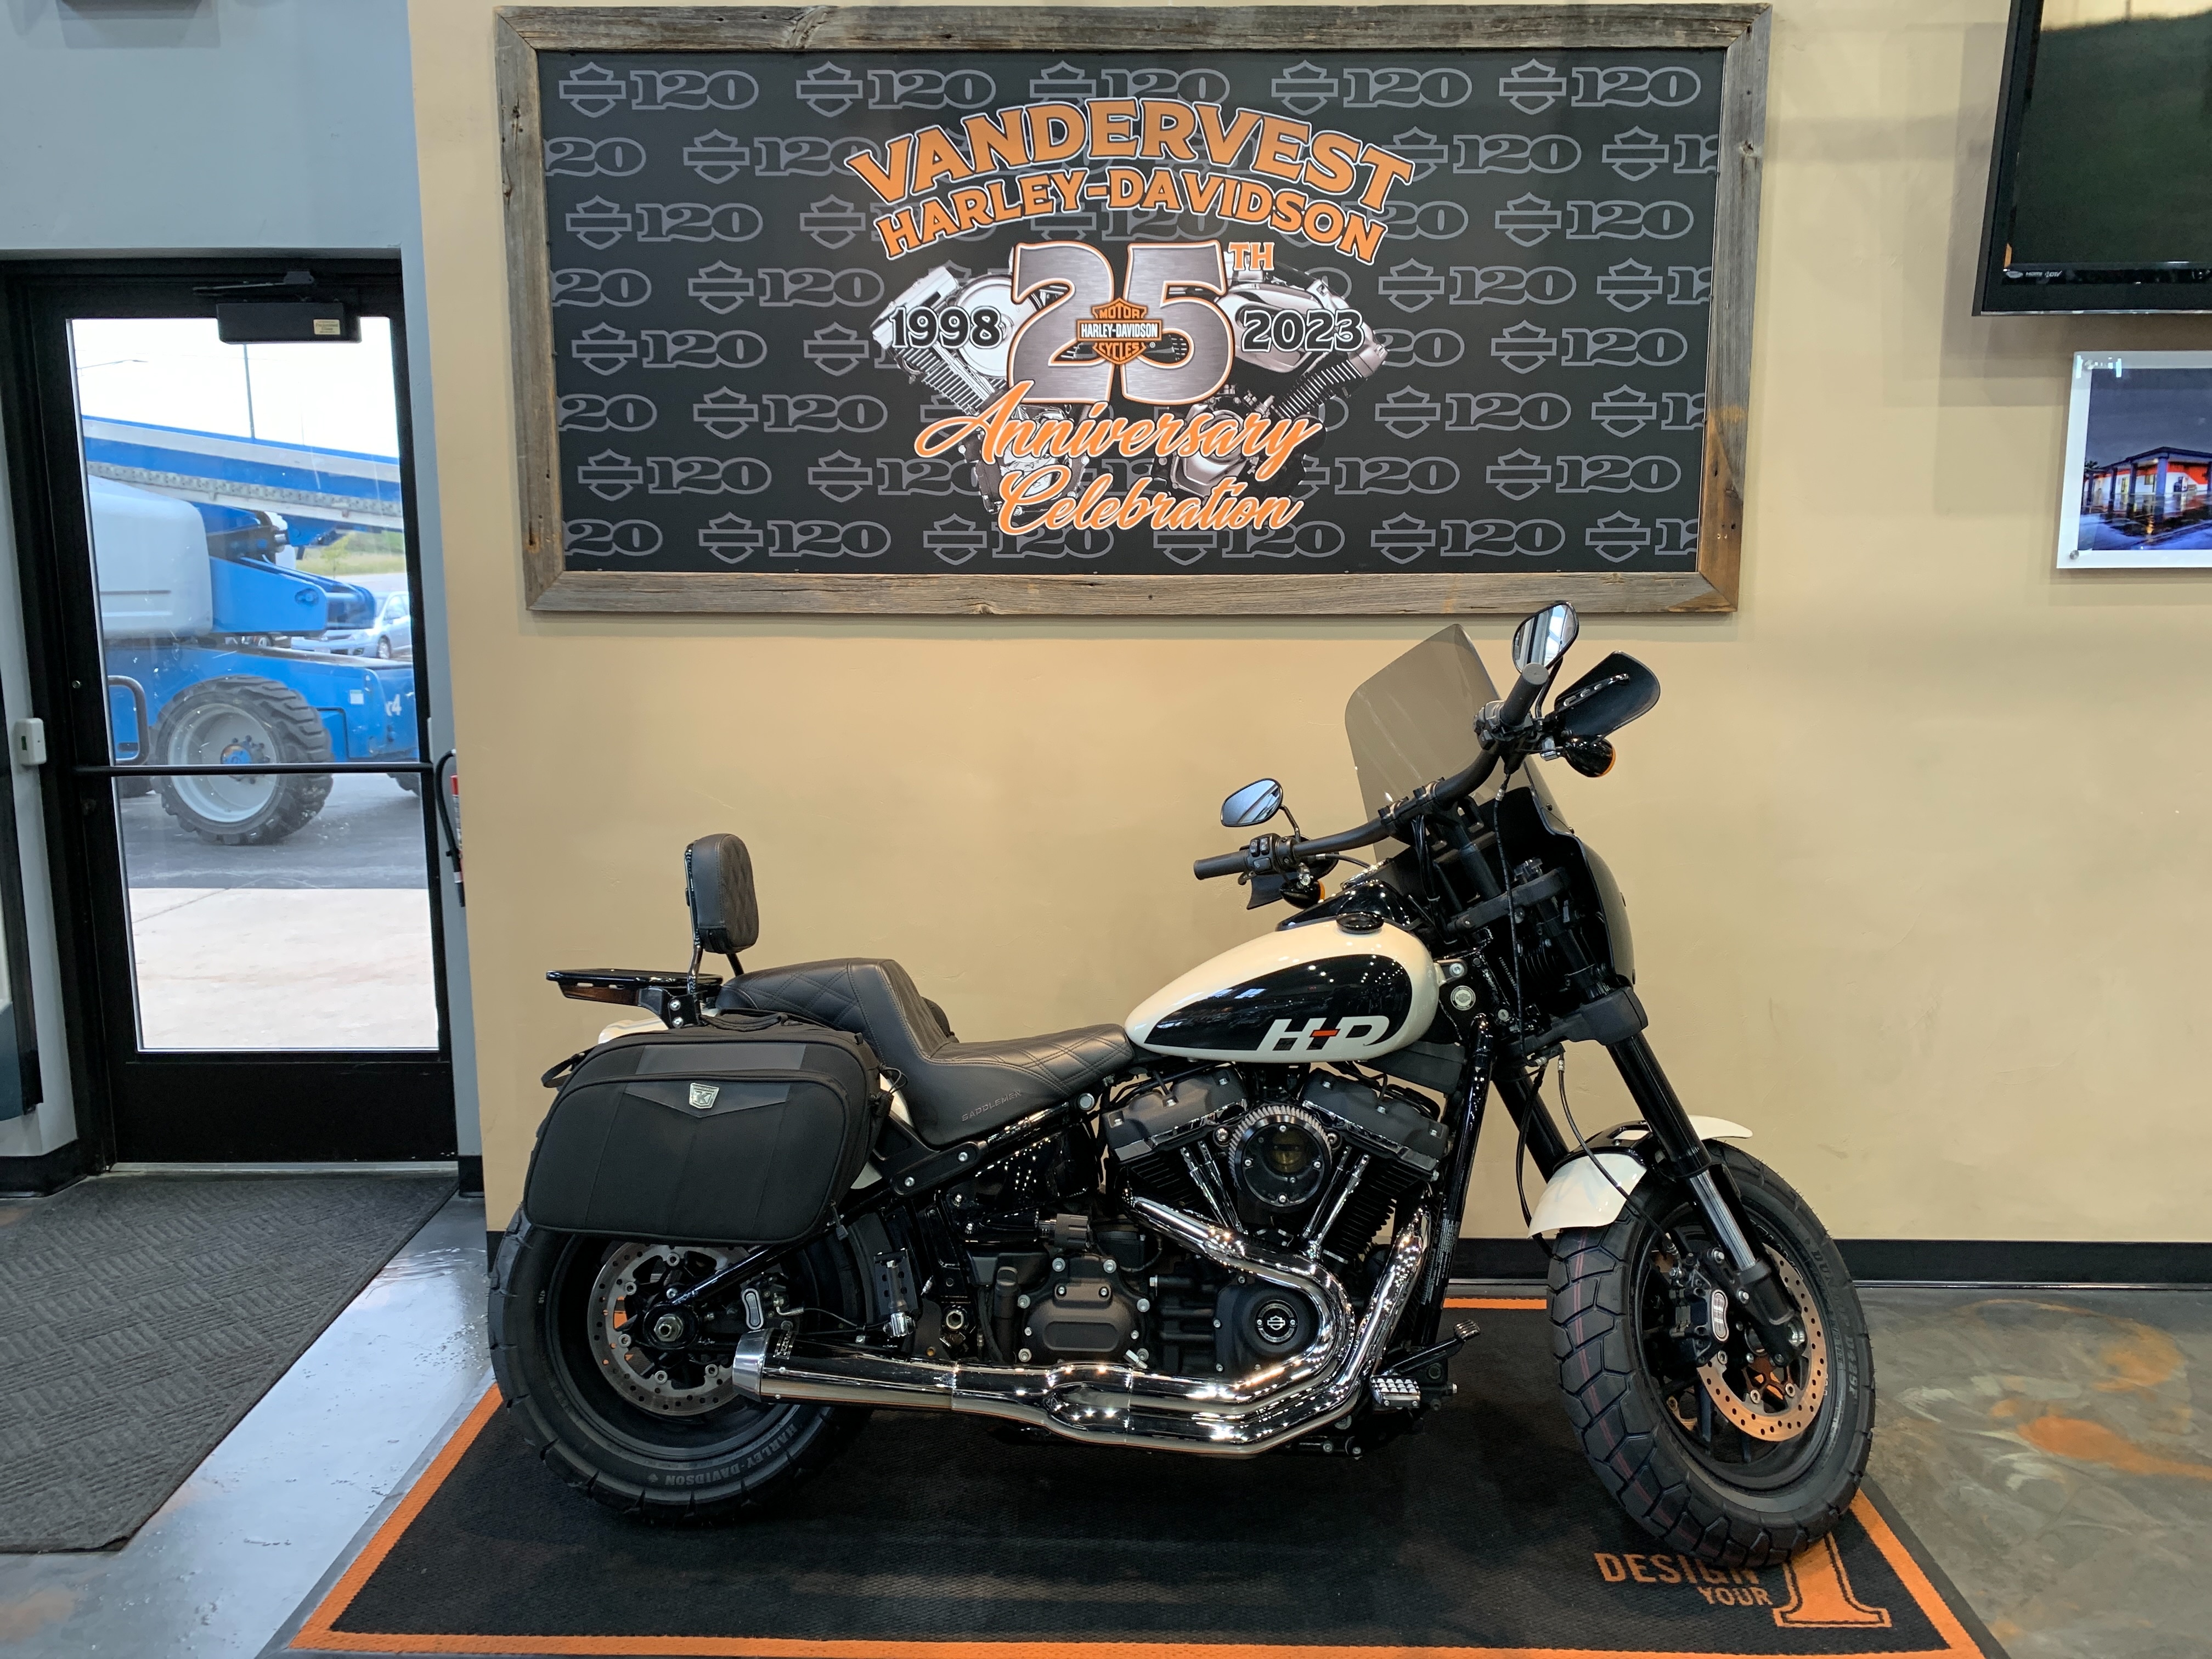 2022 HARLEY DAVIDSON HERITAGE CLASSIC 114 for Sale for $13995 at